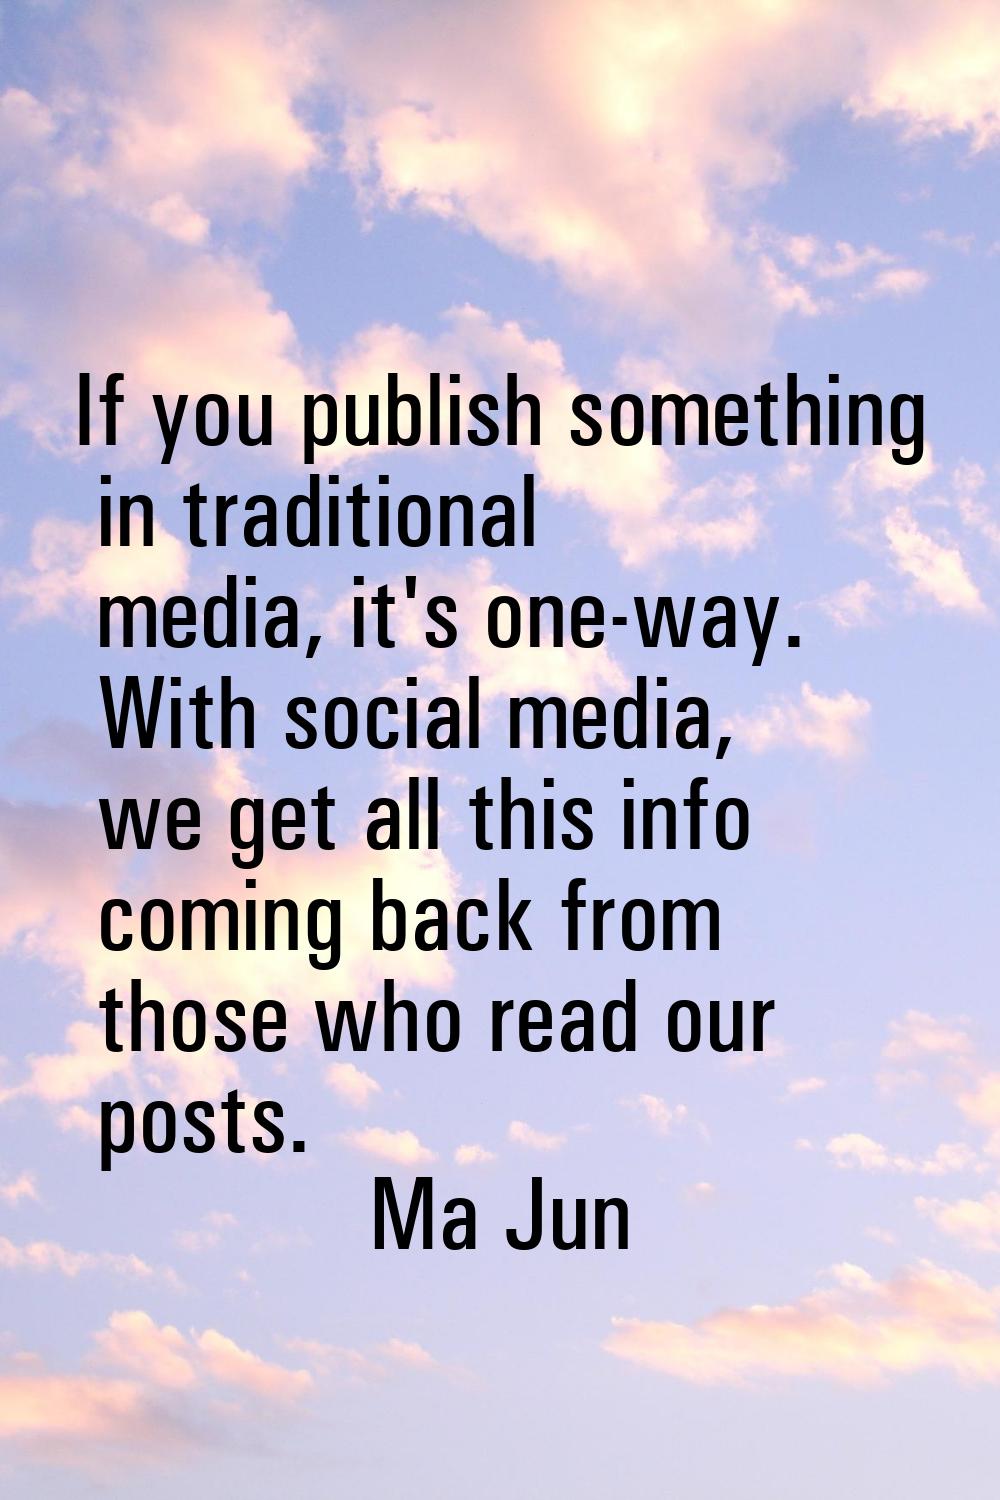 If you publish something in traditional media, it's one-way. With social media, we get all this inf